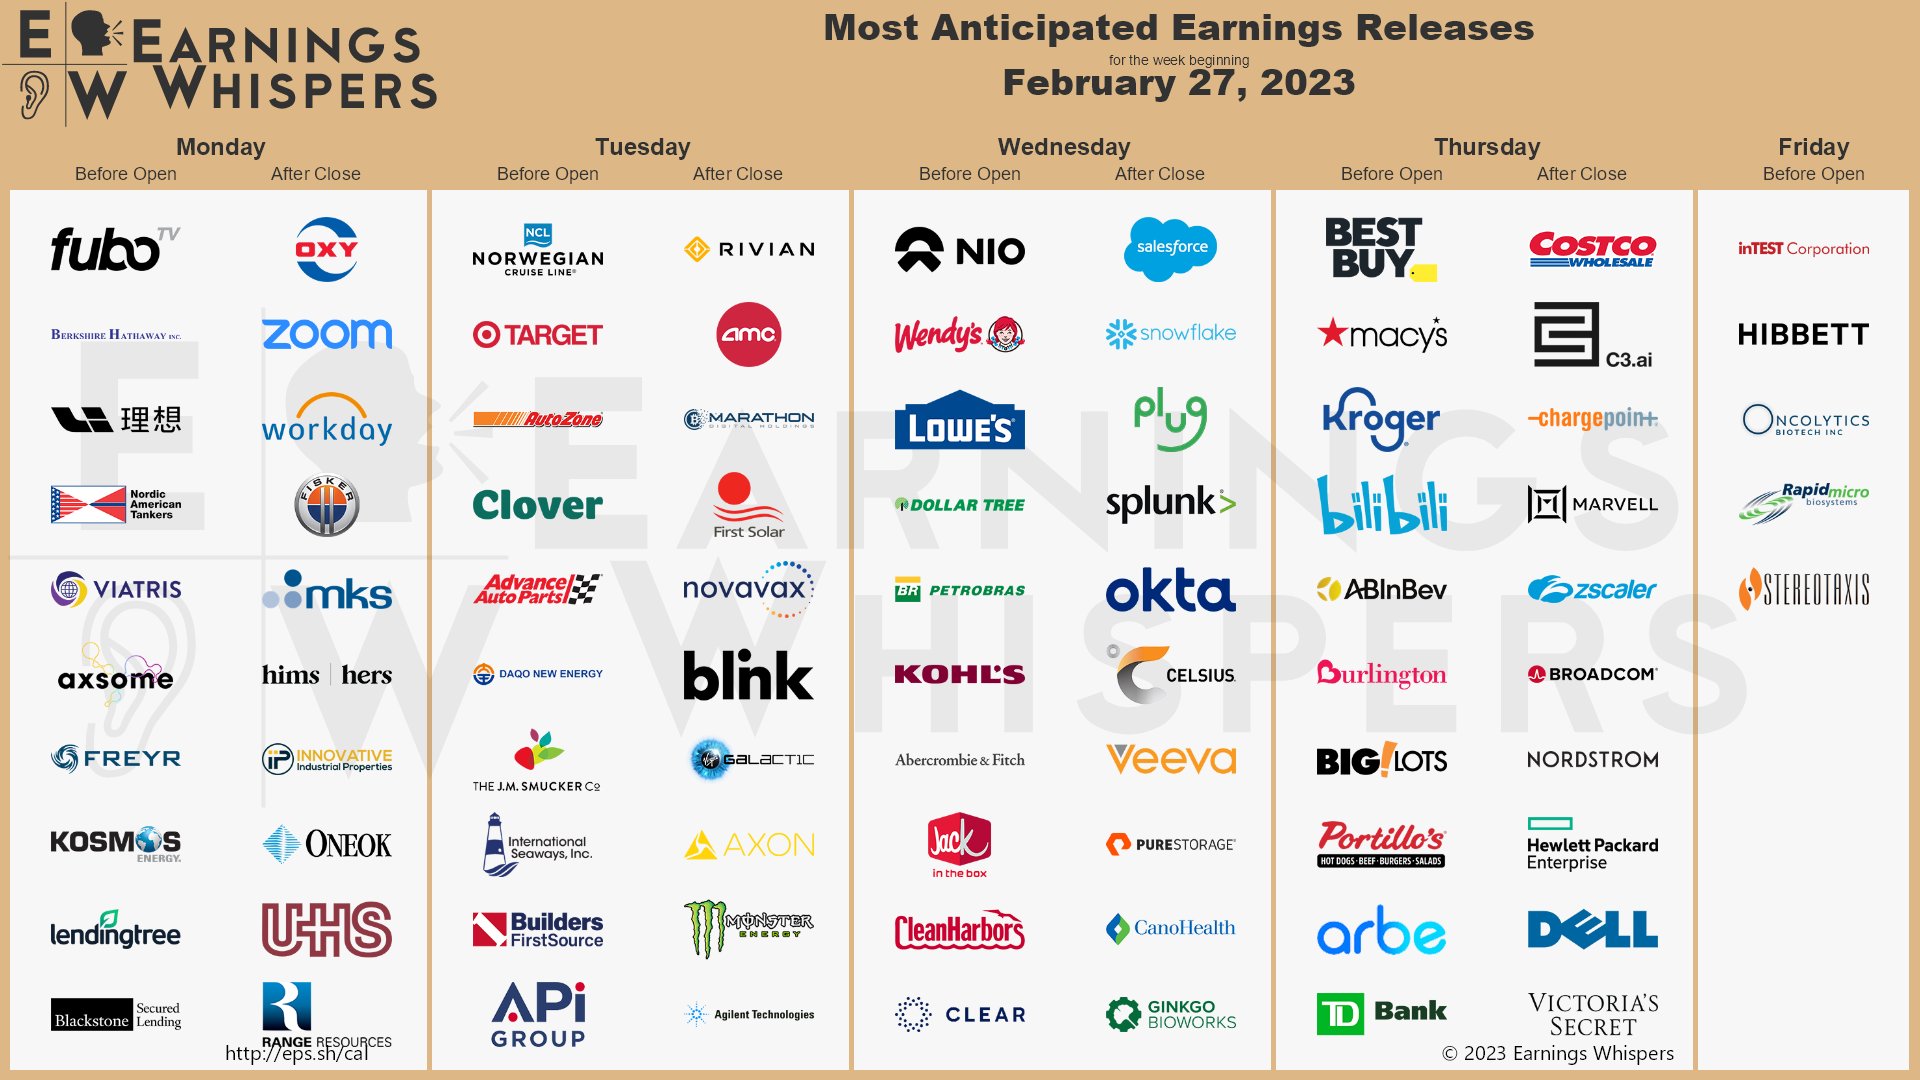 The most anticipated earnings releases scheduled for the week are NIO #NIO, fubo TV#FUBO, Wendy's #WEN, Norwegian Cruise Line #NCLH, Target #TGT, Occidental Petroleum #OXY, Berkshire Hathaway #BRK.B, Rivian Automotive #RIVN, Li Auto #LI, and AMC Entertainment #AMC. 
